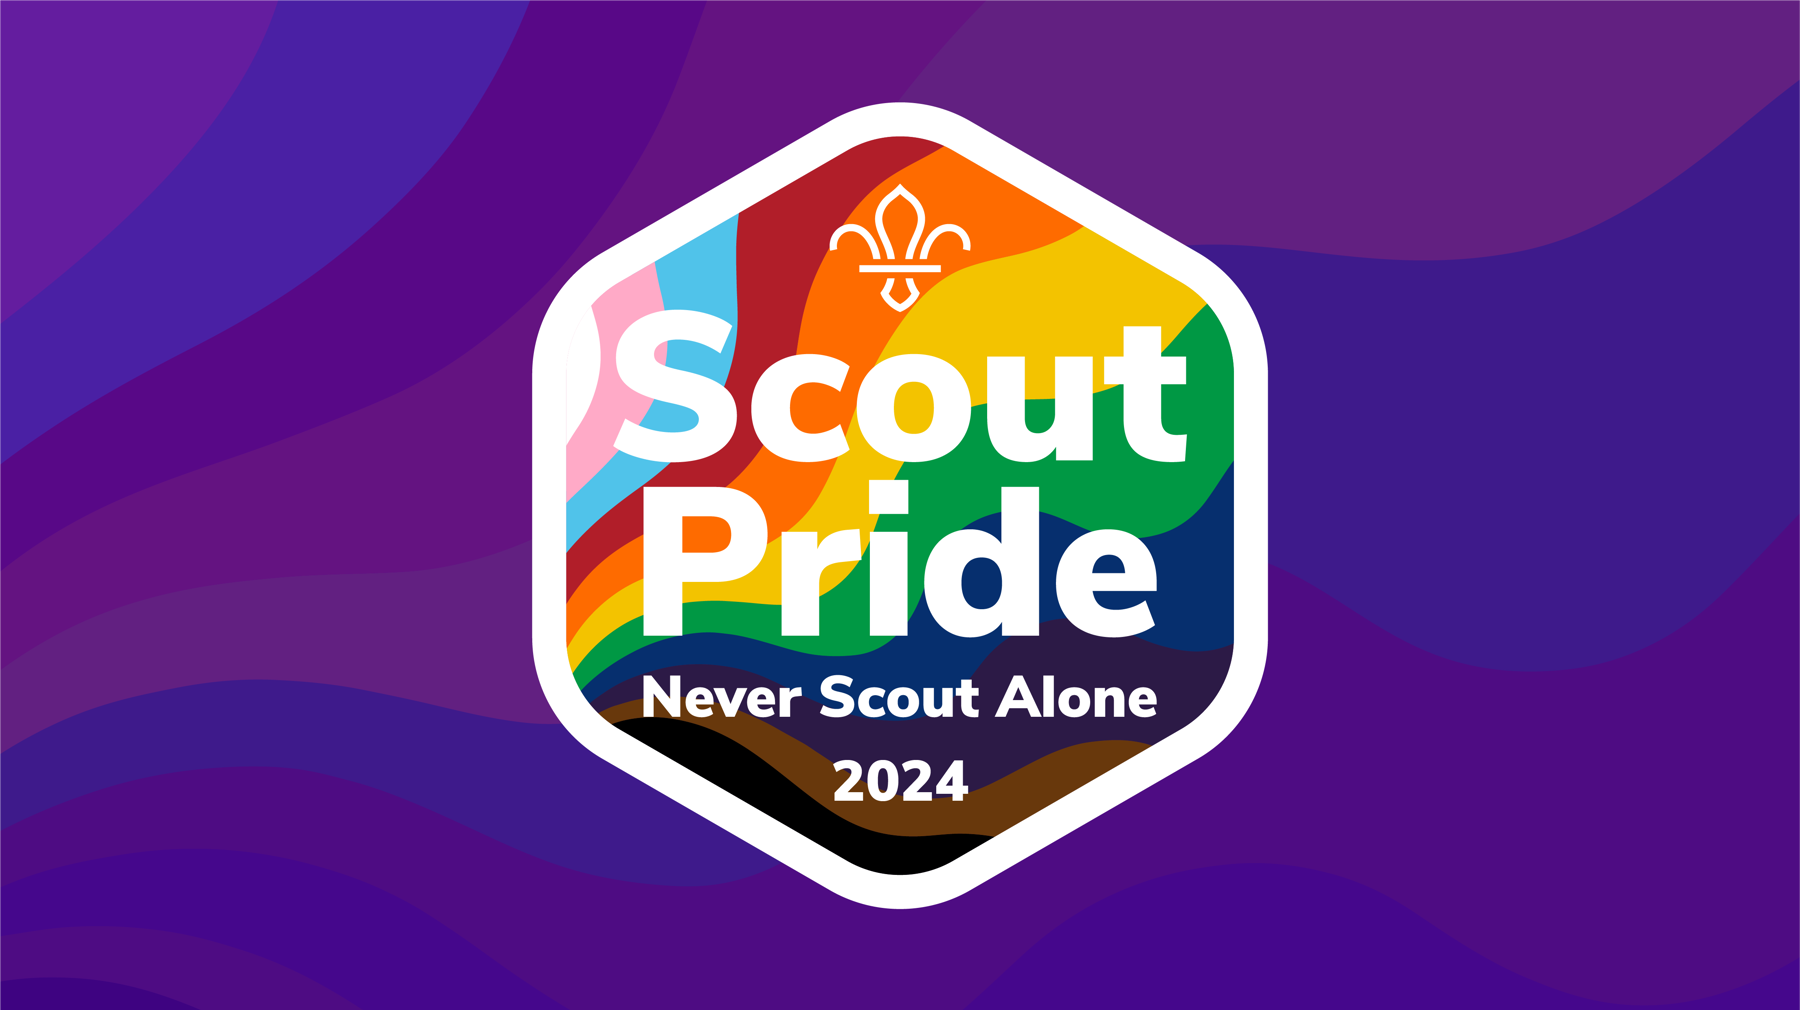 Scout Pride 2024 image